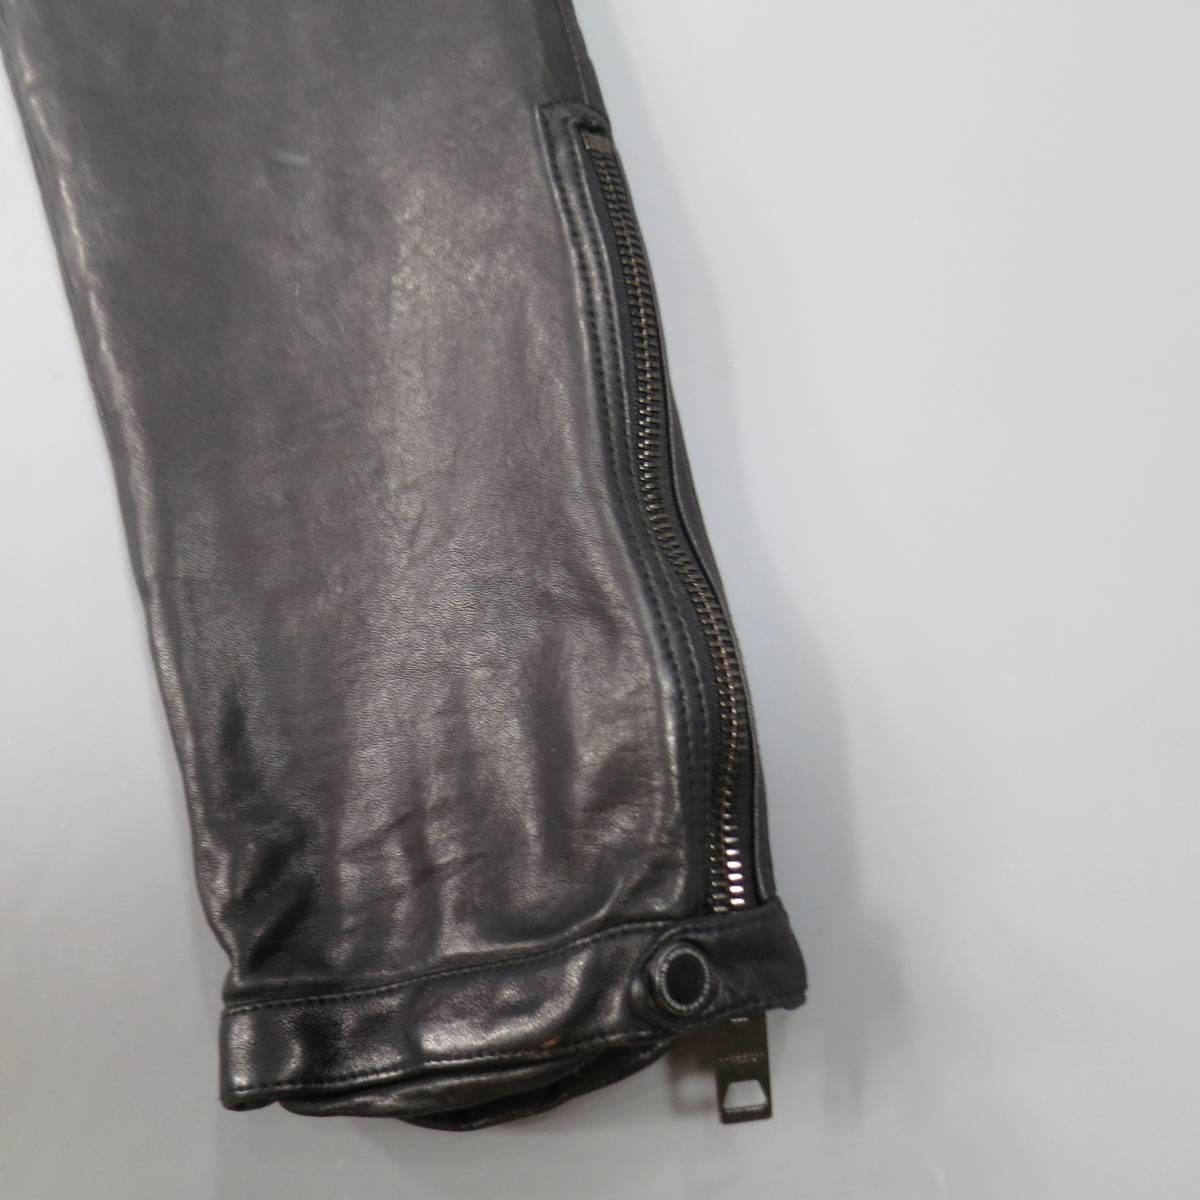 Burberry Prorsum Pants consists of 100% leather material in a black color tone. Designed in a biker style look, tone-on-tone stitching can be seen throughout body of pant with rib knee patches and detailed zig-zag's around the mid-section. Leg is